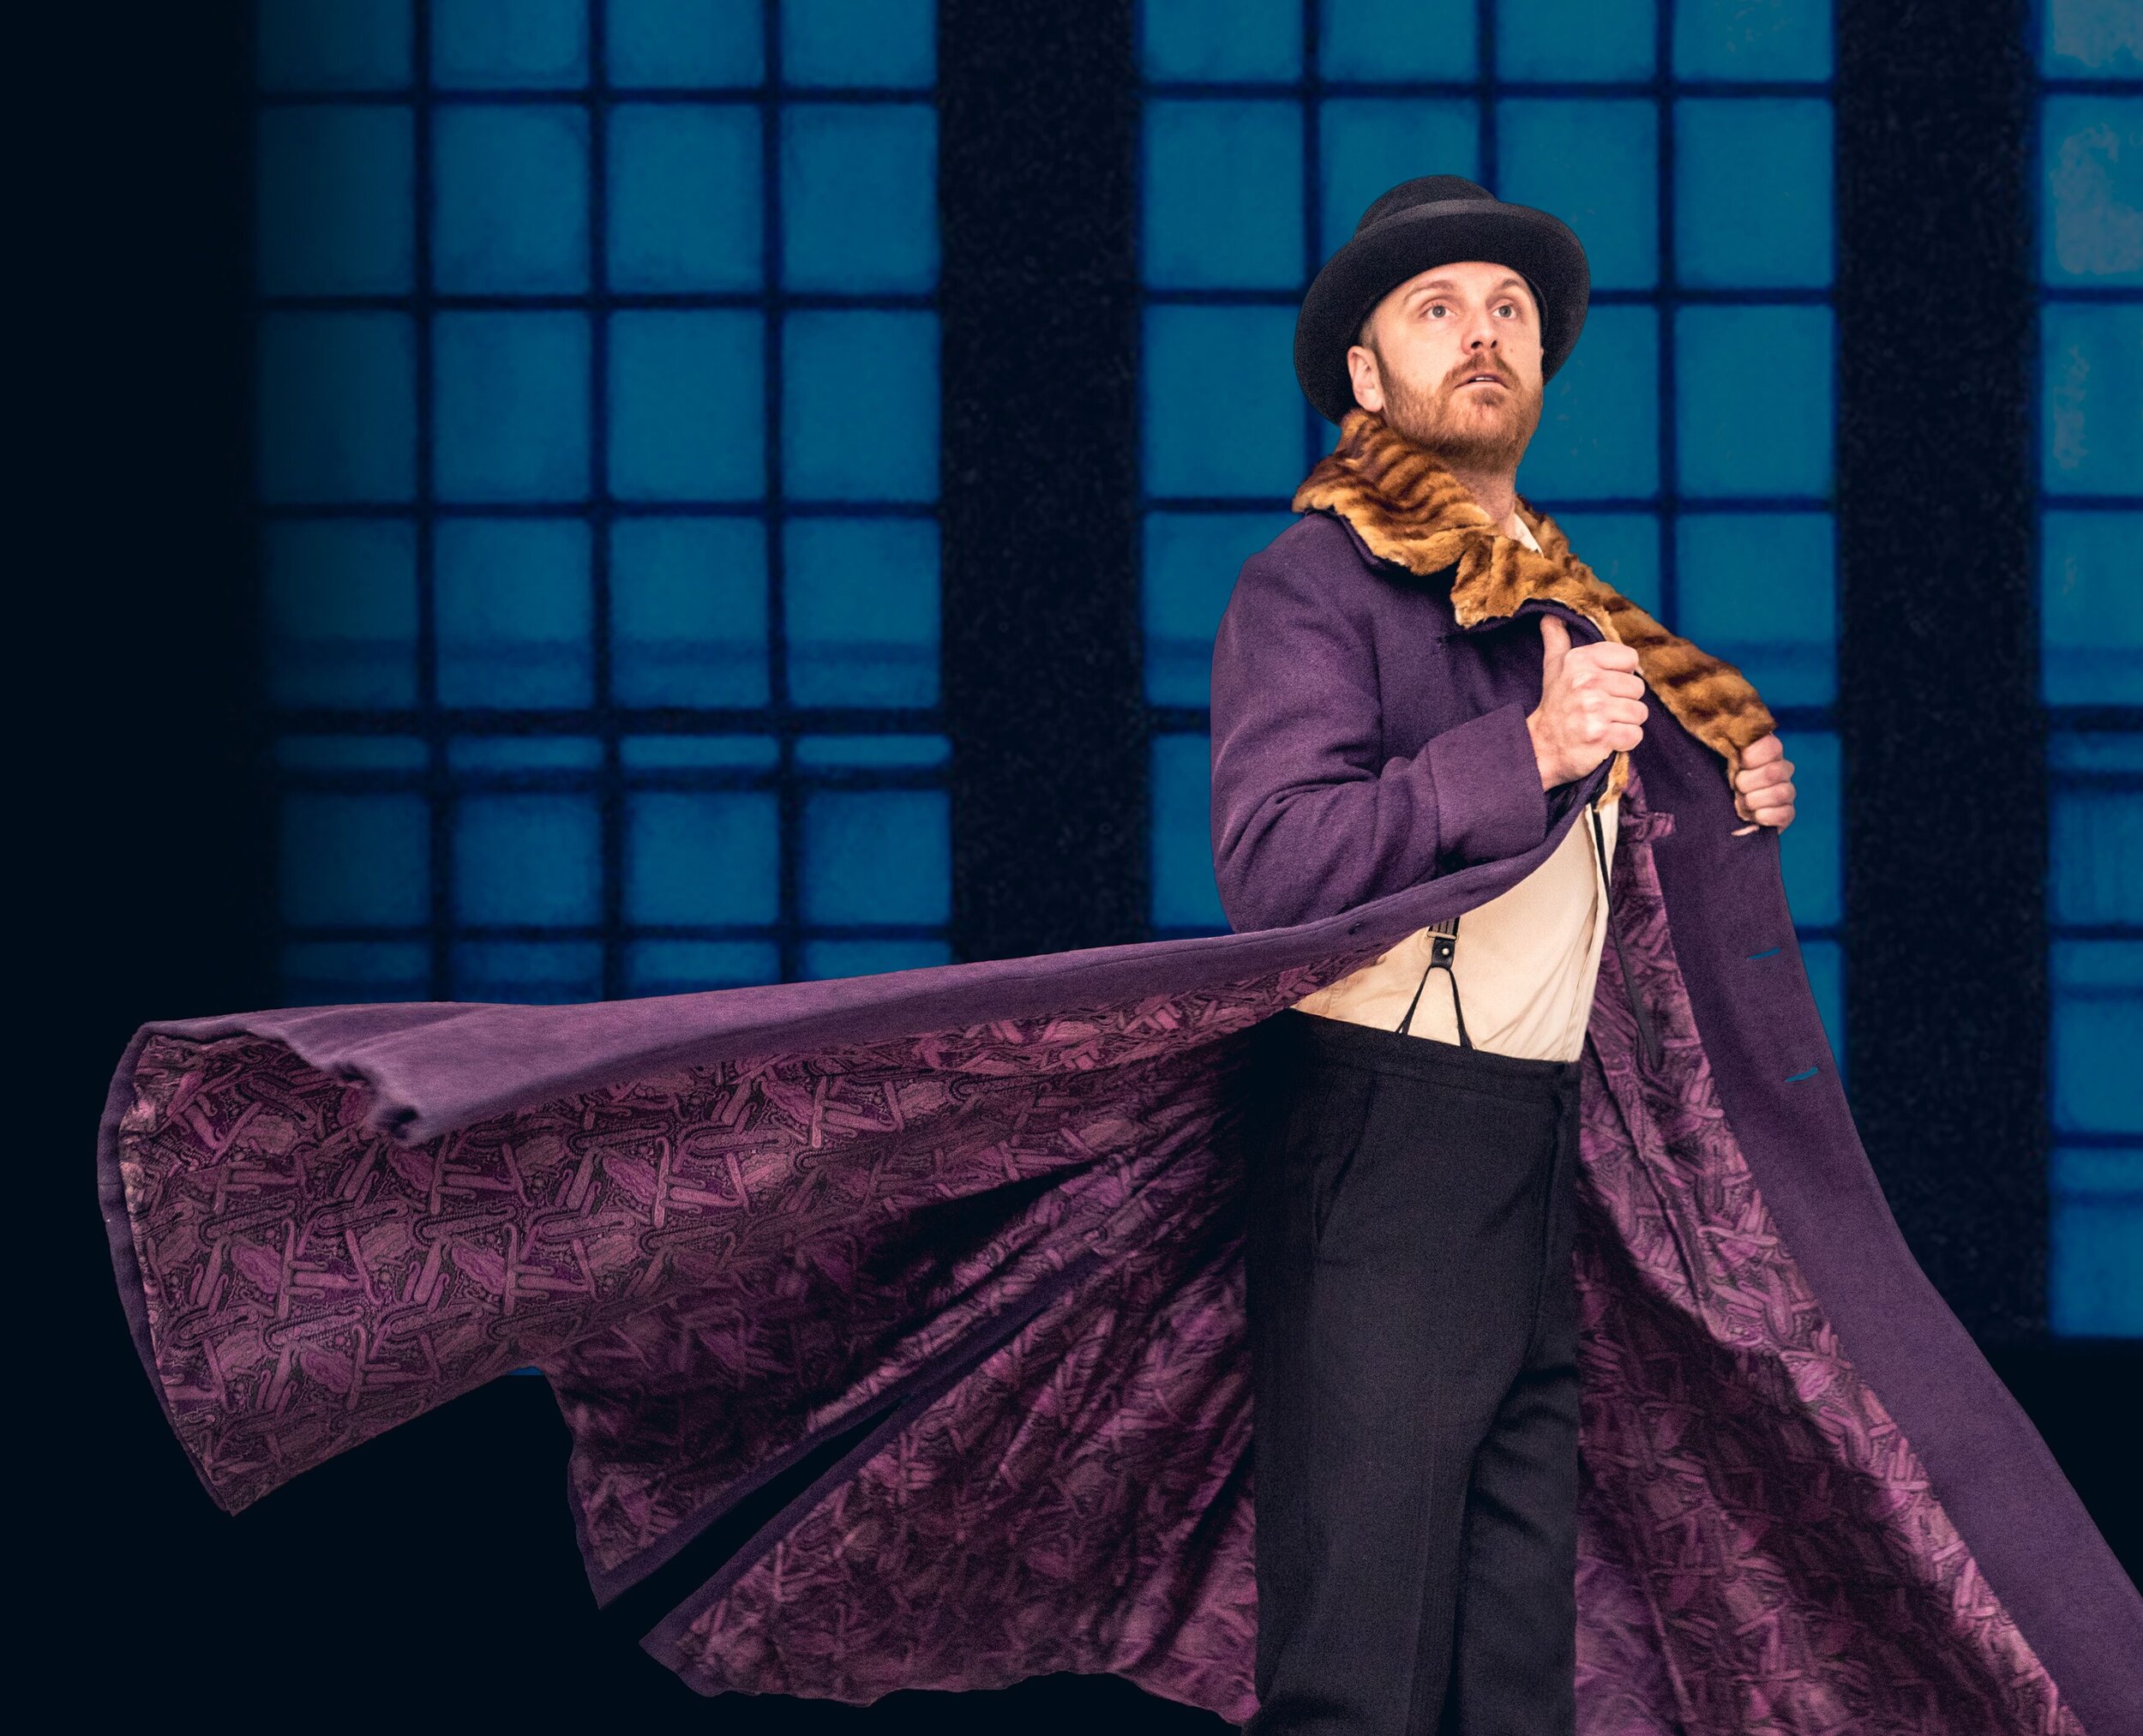  “In the lead role of Akakiy Akakiyevich Basmachkin, baritone&nbsp;Geoffrey Sirett&nbsp;was the perfect fit. Tall, lean, and quirkily handsome Geoffrey sang the role with all of his characteristic artistry. Big and booming at some points, ethereal an